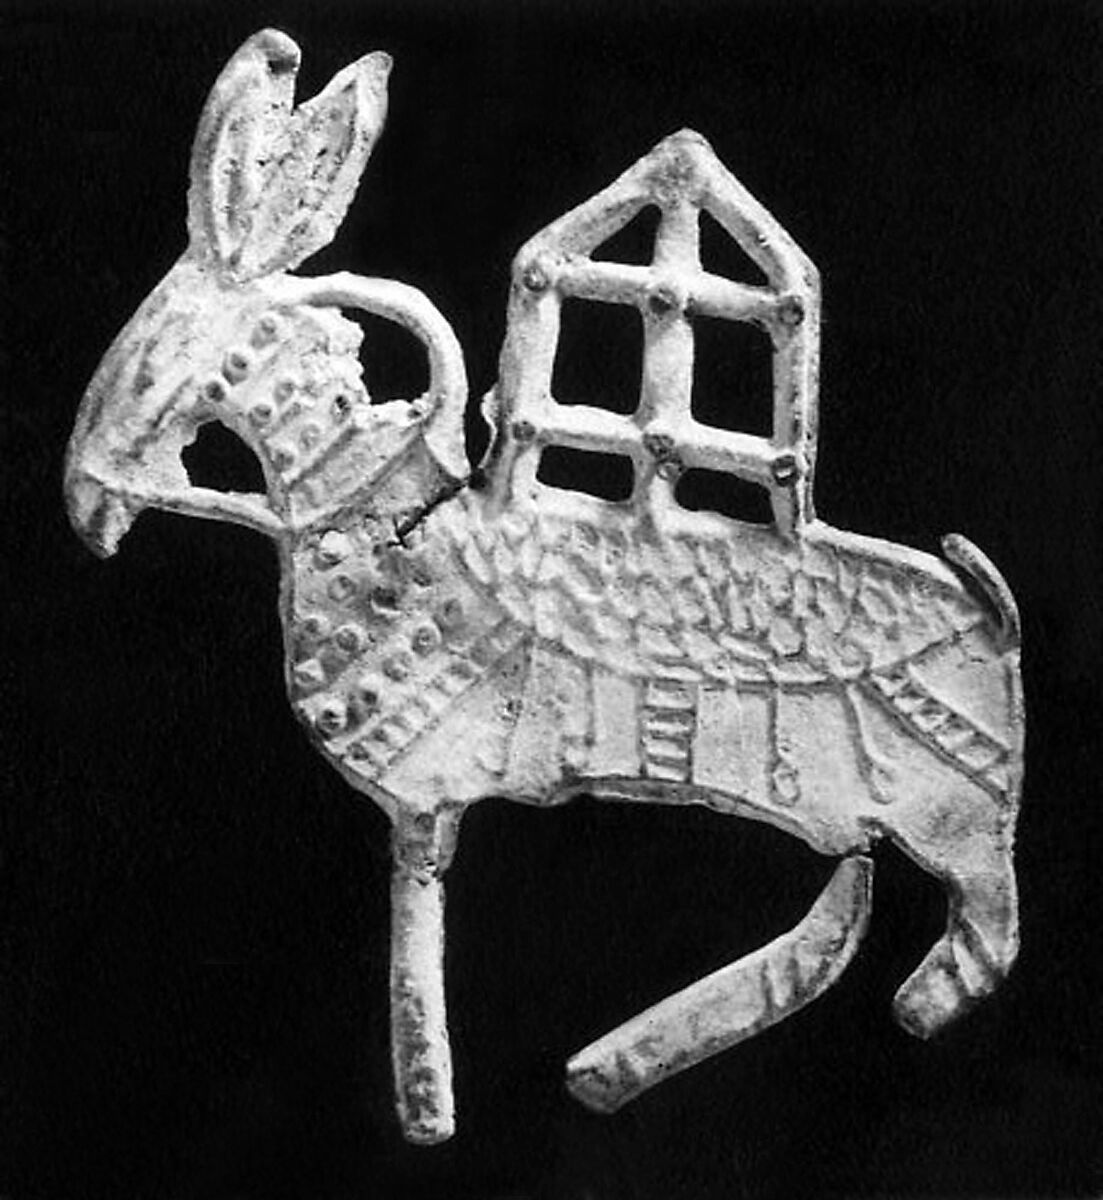 Plaque in the shape of a donkey, Lead, China? 